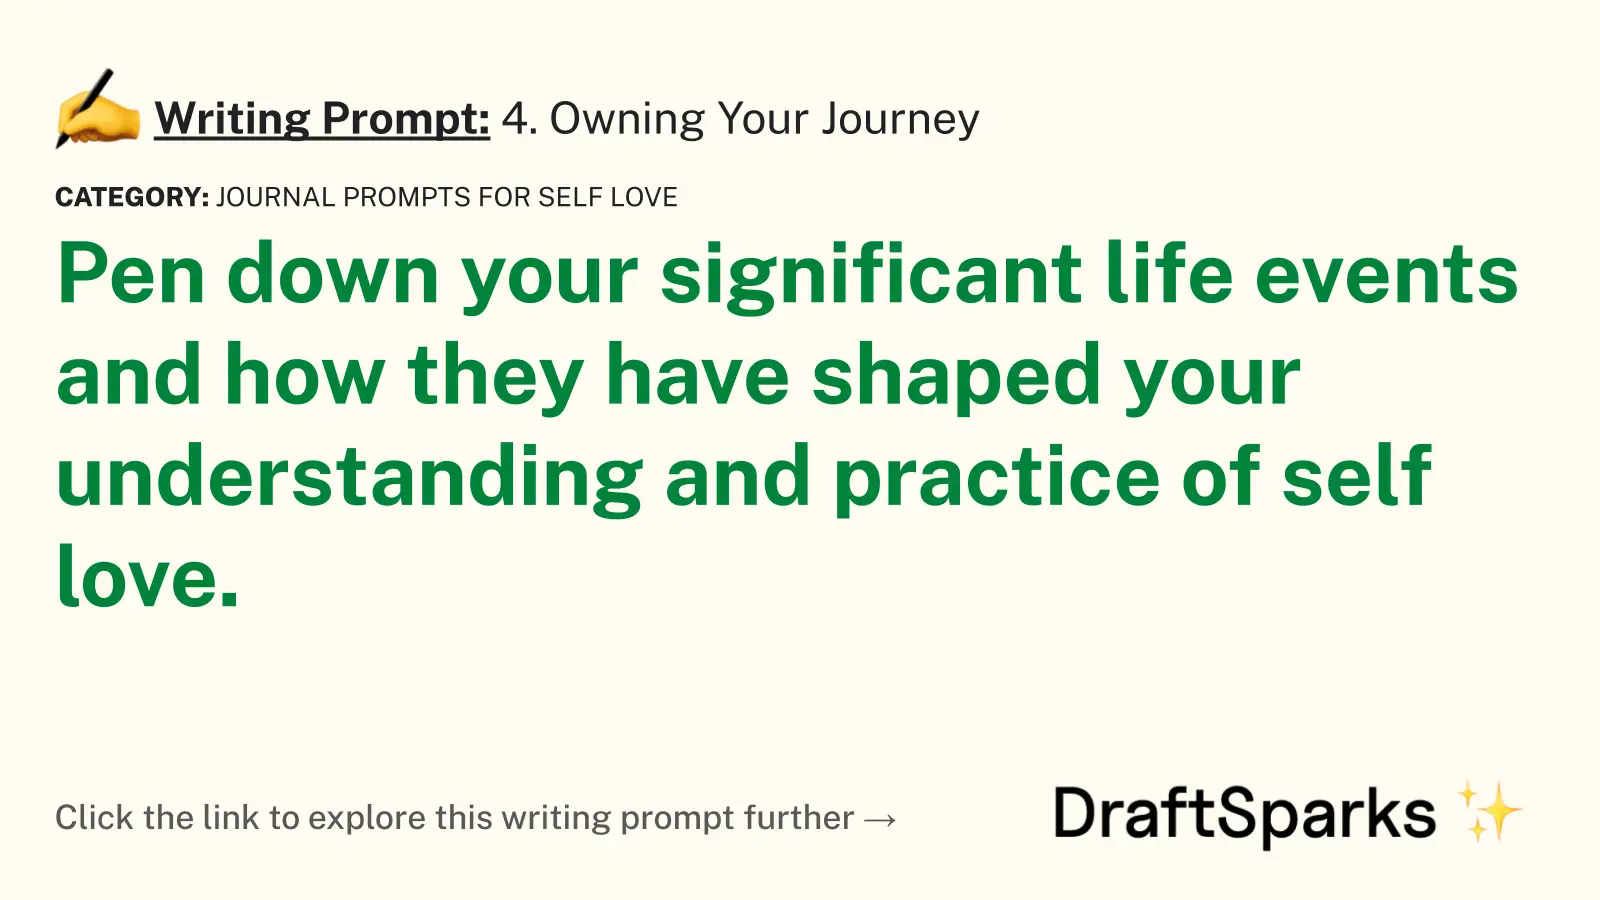 4. Owning Your Journey